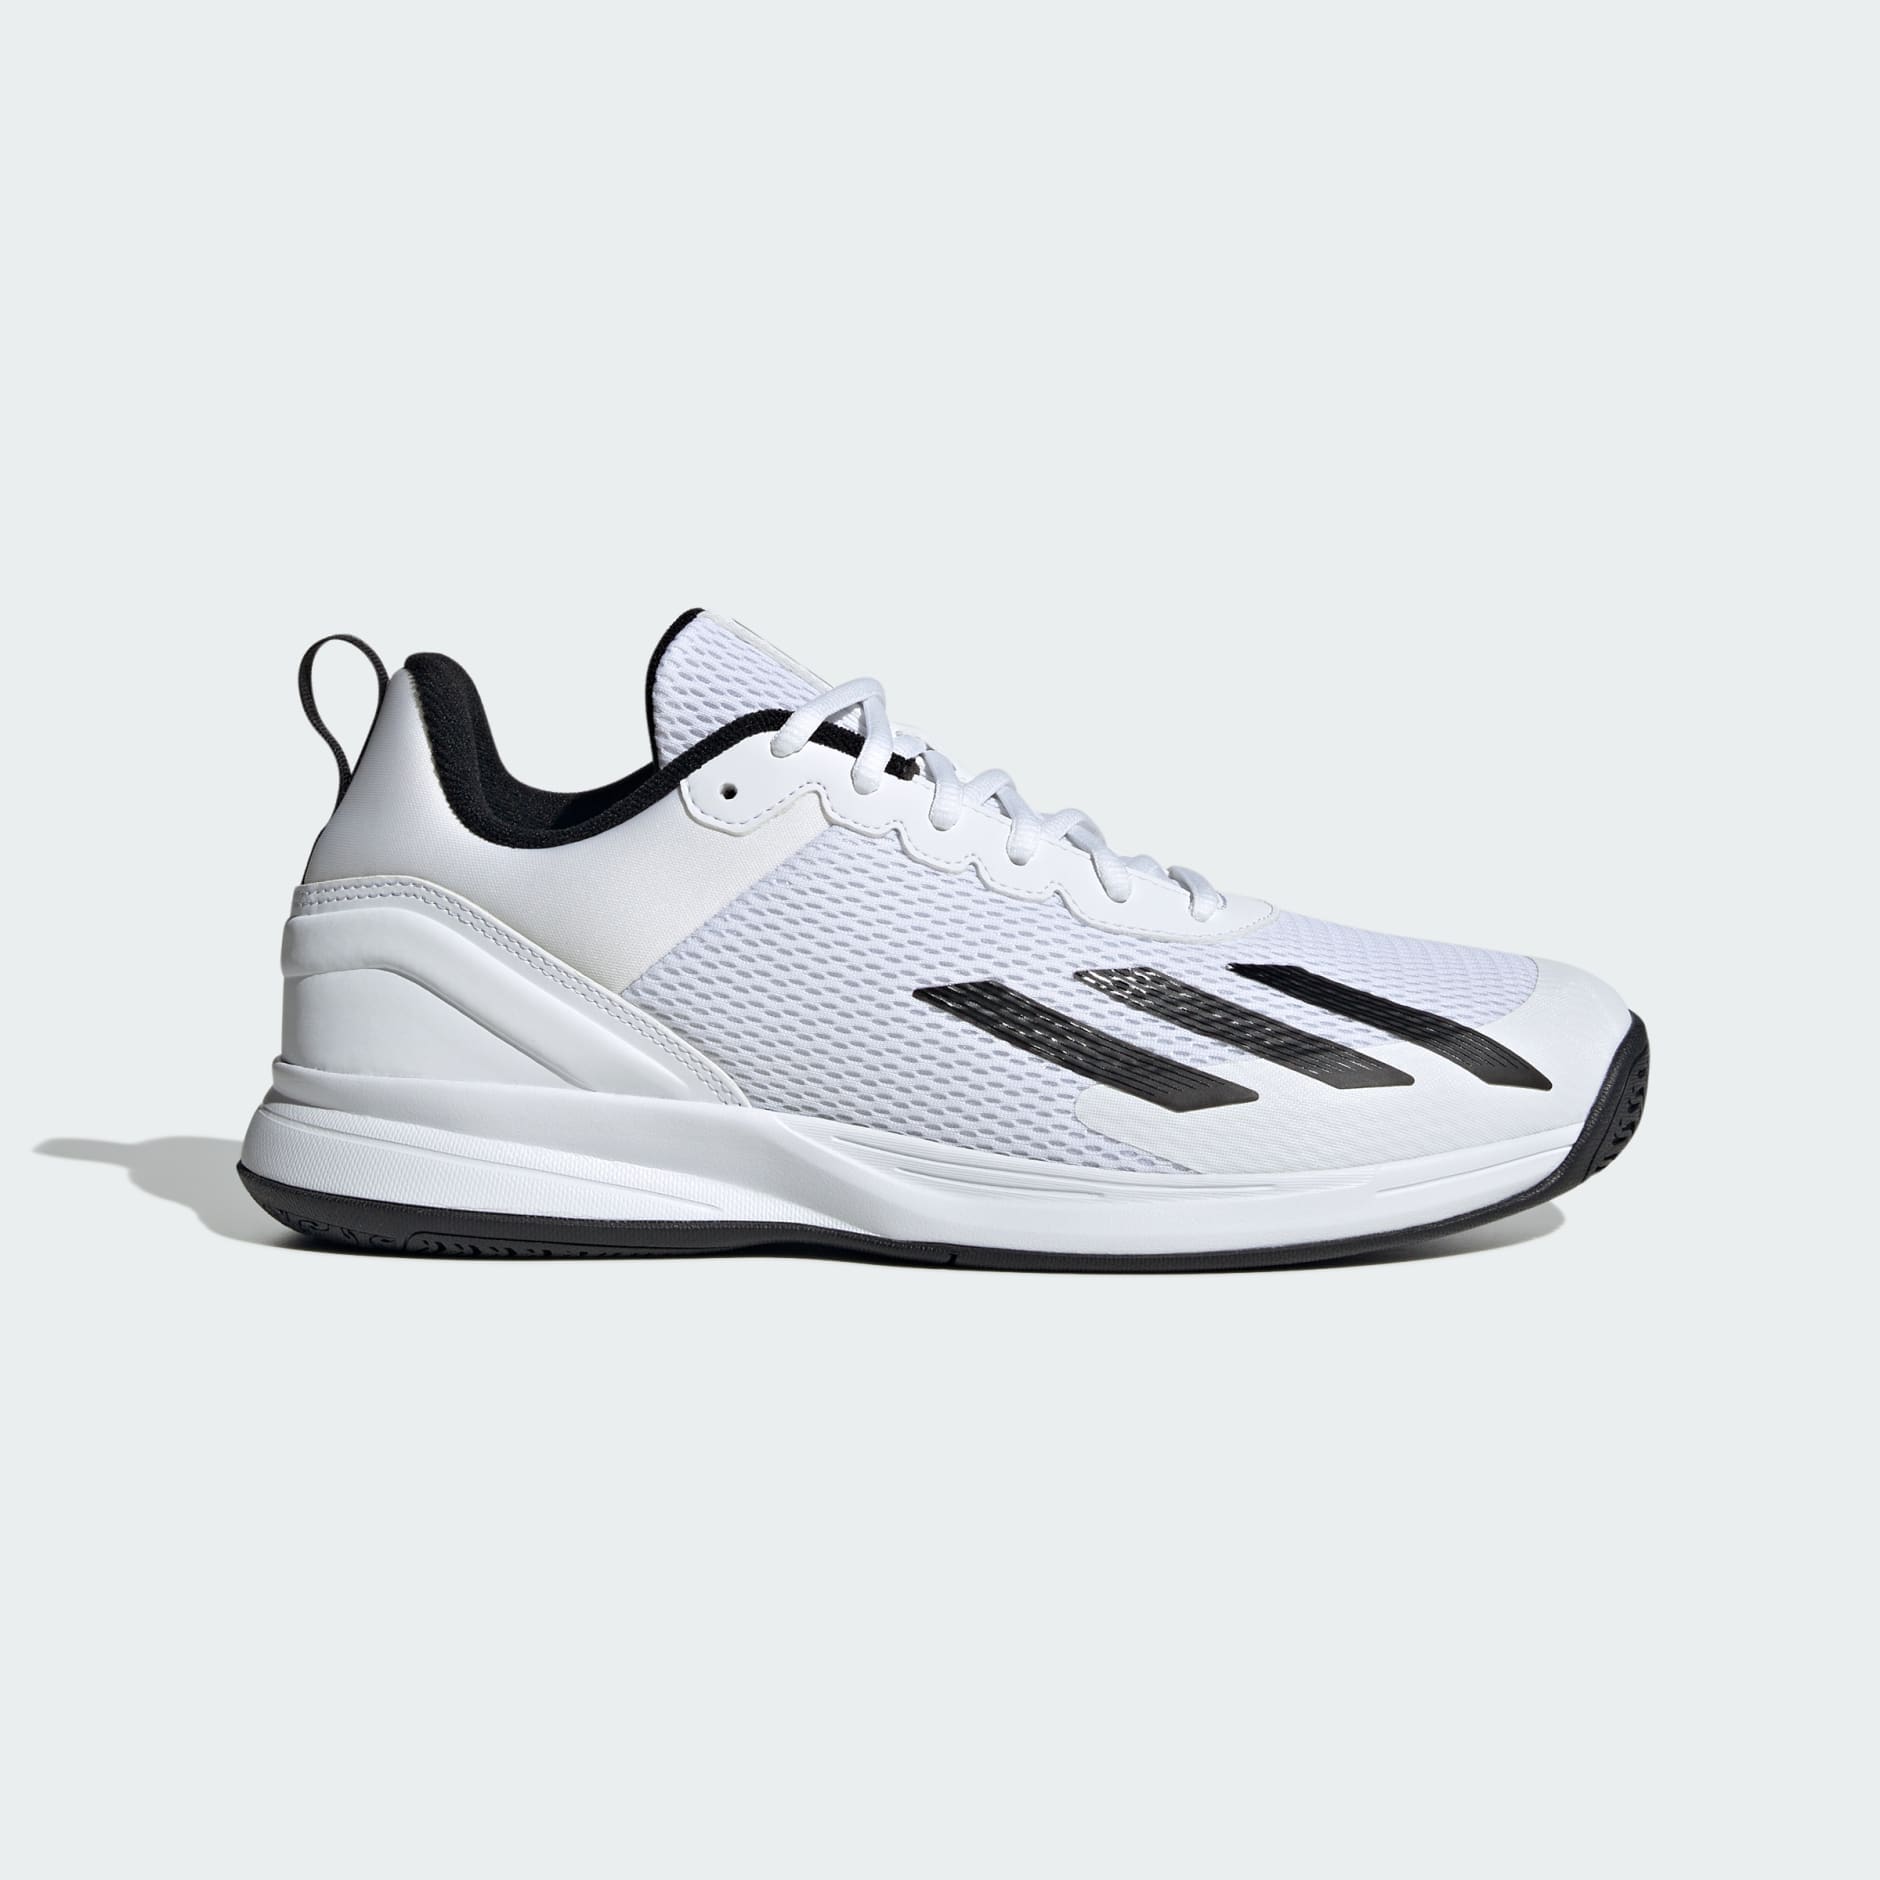 Shoes - Courtflash Speed Tennis Shoes - White | adidas South Africa